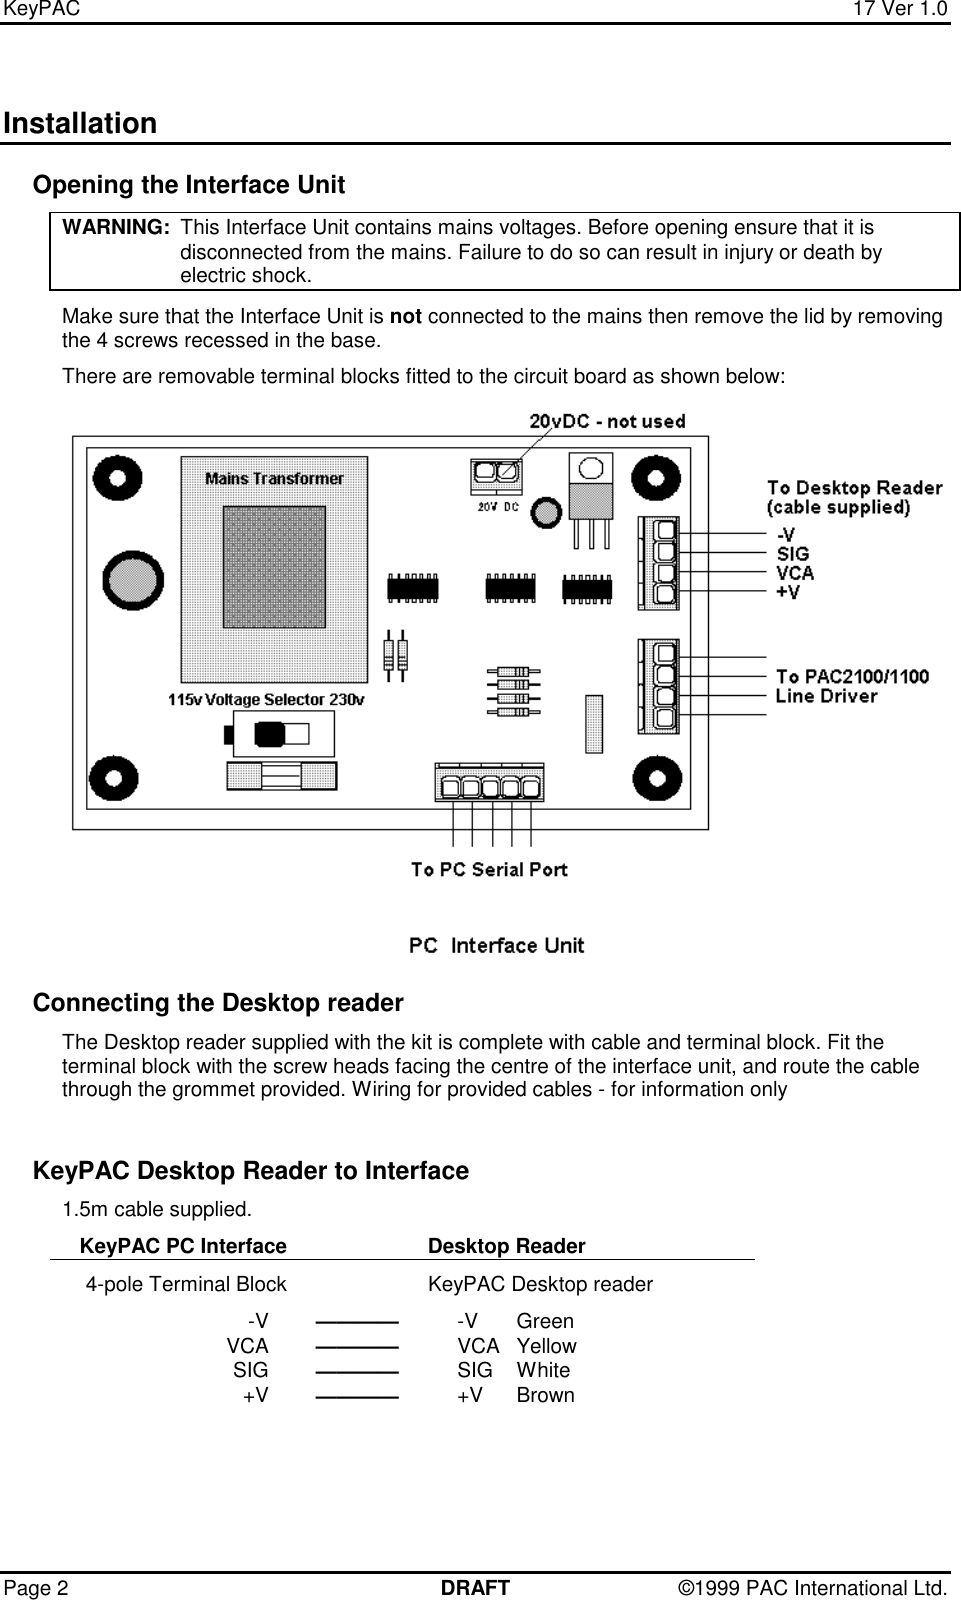 KeyPAC  17 Ver 1.0Page 2 DRAFT ©1999 PAC International Ltd.InstallationOpening the Interface UnitWARNING: This Interface Unit contains mains voltages. Before opening ensure that it isdisconnected from the mains. Failure to do so can result in injury or death byelectric shock.Make sure that the Interface Unit is not connected to the mains then remove the lid by removingthe 4 screws recessed in the base.There are removable terminal blocks fitted to the circuit board as shown below:Connecting the Desktop readerThe Desktop reader supplied with the kit is complete with cable and terminal block. Fit theterminal block with the screw heads facing the centre of the interface unit, and route the cablethrough the grommet provided. Wiring for provided cables - for information onlyKeyPAC Desktop Reader to Interface1.5m cable supplied.KeyPAC PC Interface Desktop Reader4-pole Terminal Block KeyPAC Desktop reader-V ———— -V GreenVCA ———— VCA YellowSIG ———— SIG White+V ———— +V Brown